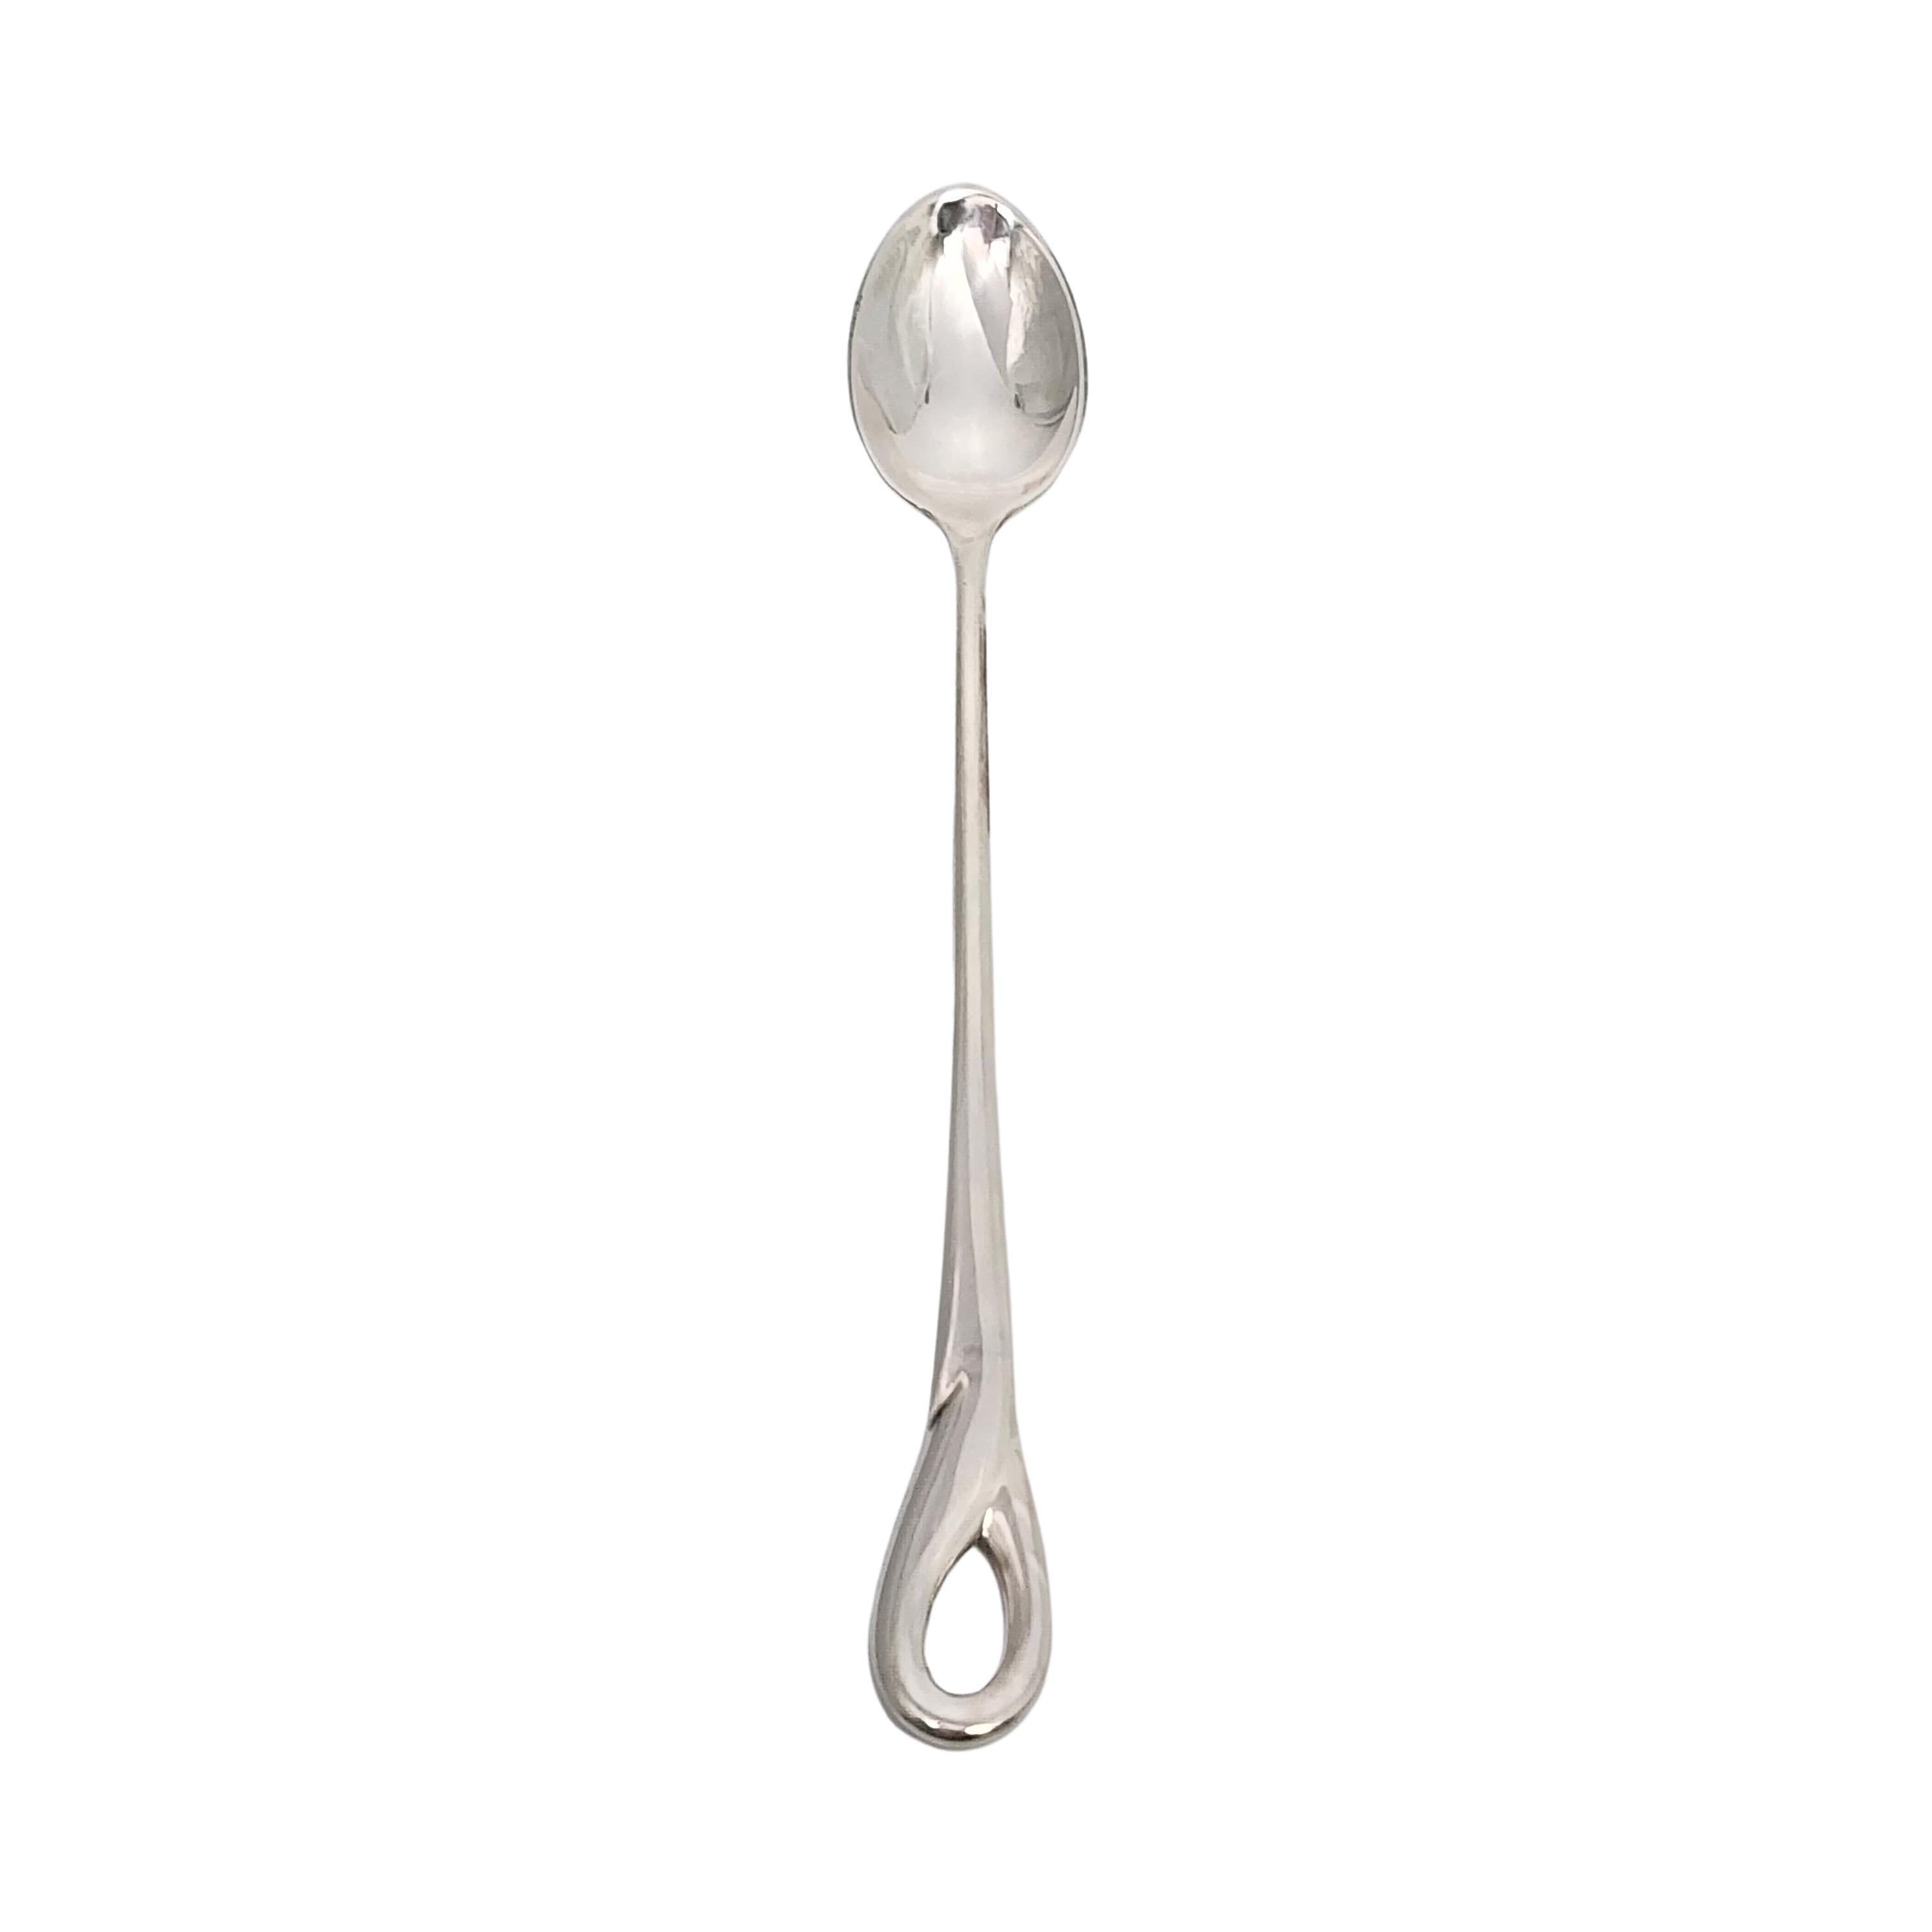 Tiffany & Co sterling silver baby feeding spoon in the Padova pattern by Elsa Peretti.

Padova is a simple and classic design featuring a loop at the top of the handle, named for the Italian city in which it was created. Includes Tiffany & Co box